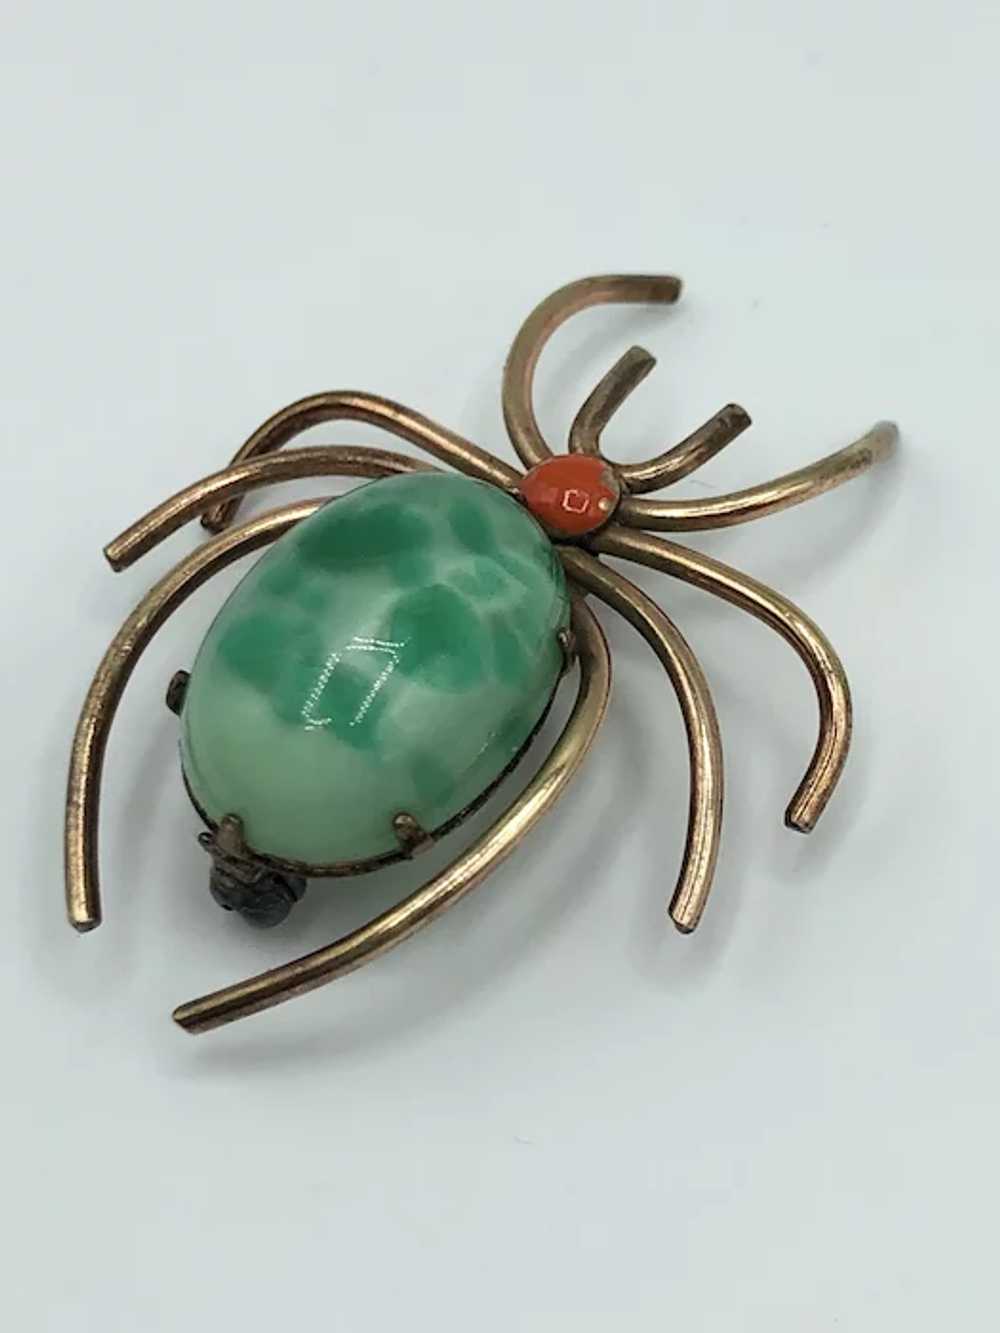 10k Gold Filled White Co Spider Brooch Pin - image 5